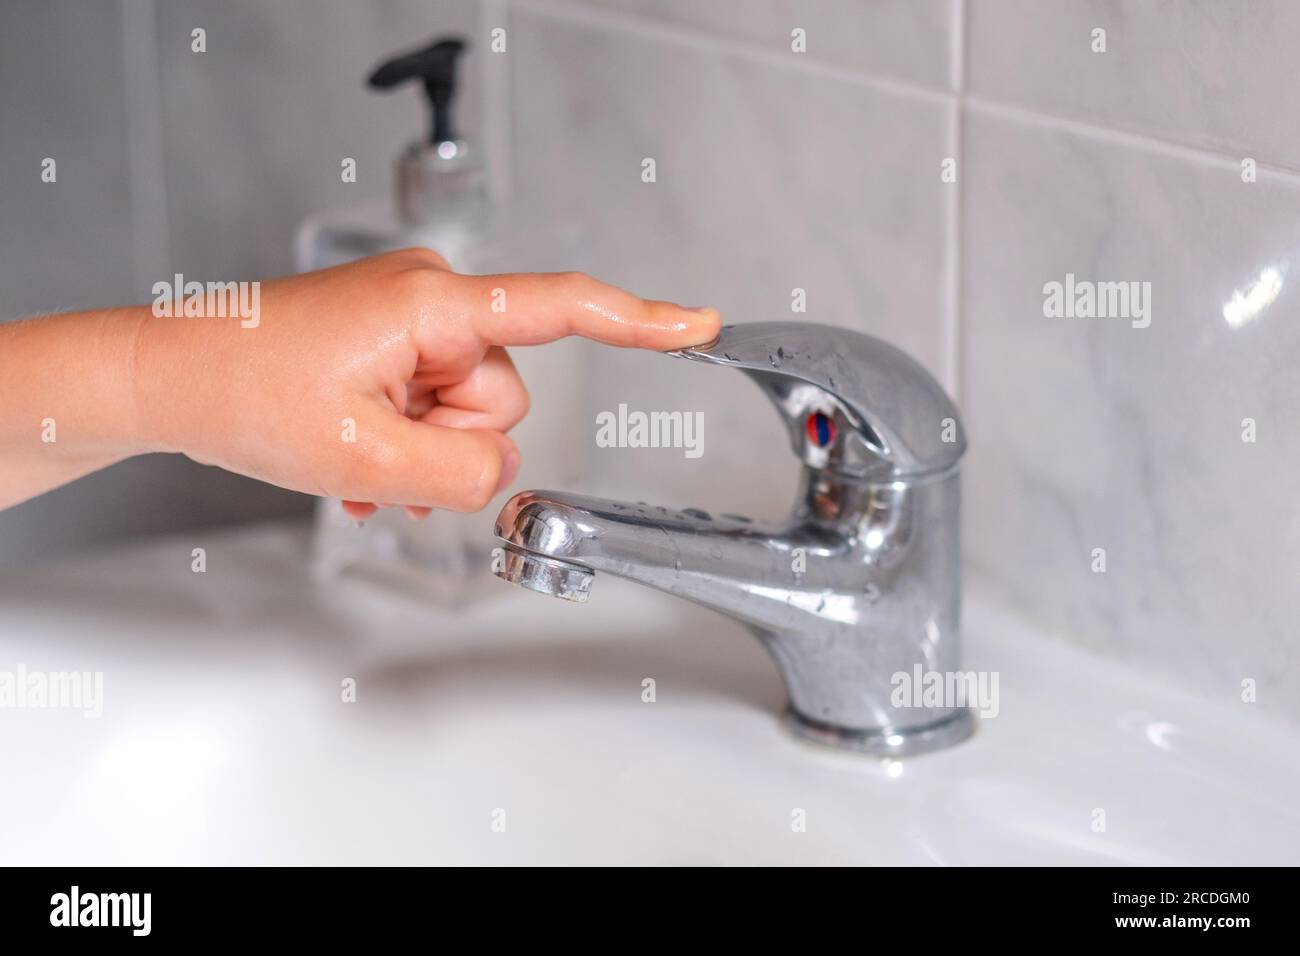 The child turn off the water tap after hygienic procedures. The concept save water and protect the environment. Stock Photo